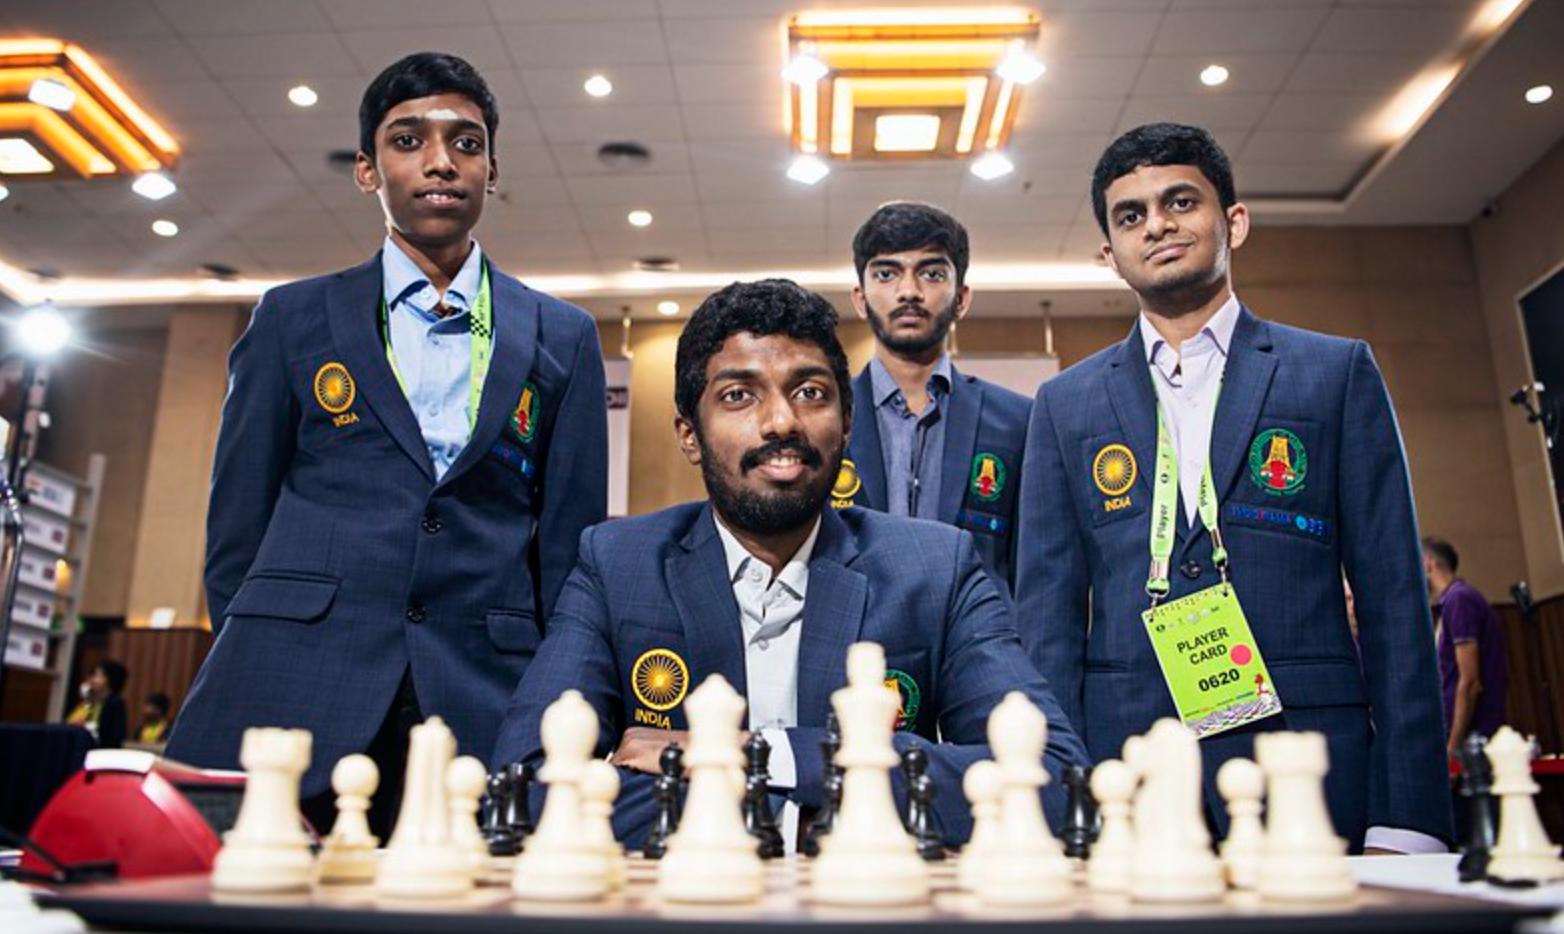 Explained  Chess Olympiad: Origins of the event, rules & India's